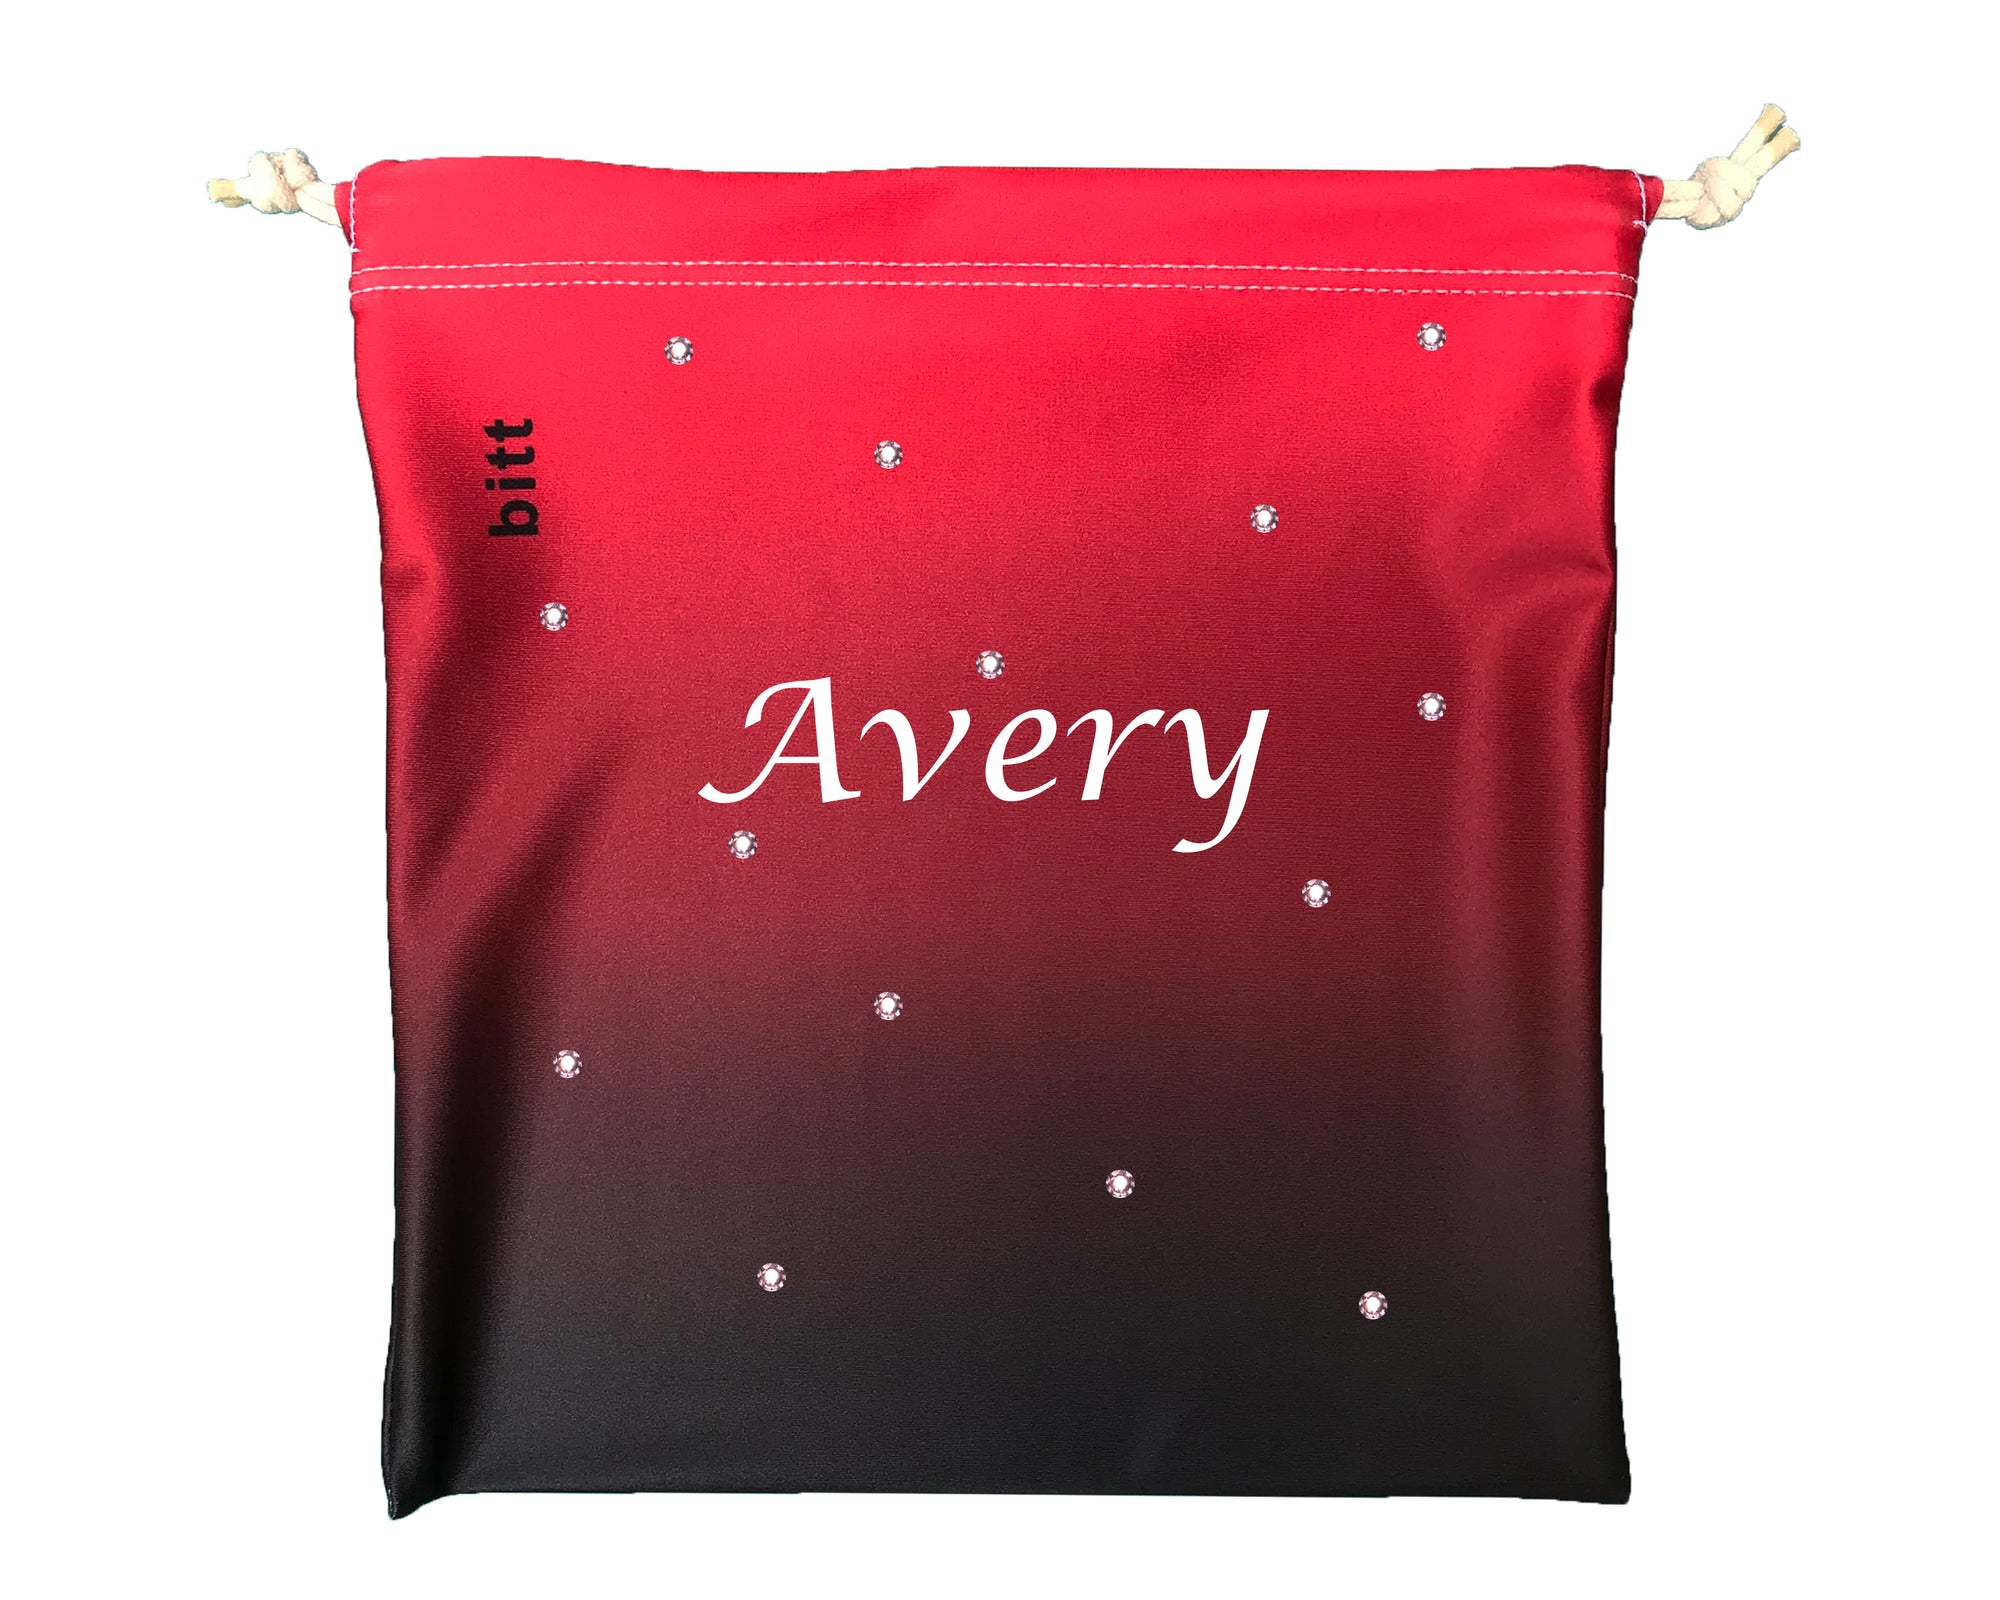 Personalized Gymnastics Grip Bag - Red and Black Ombre